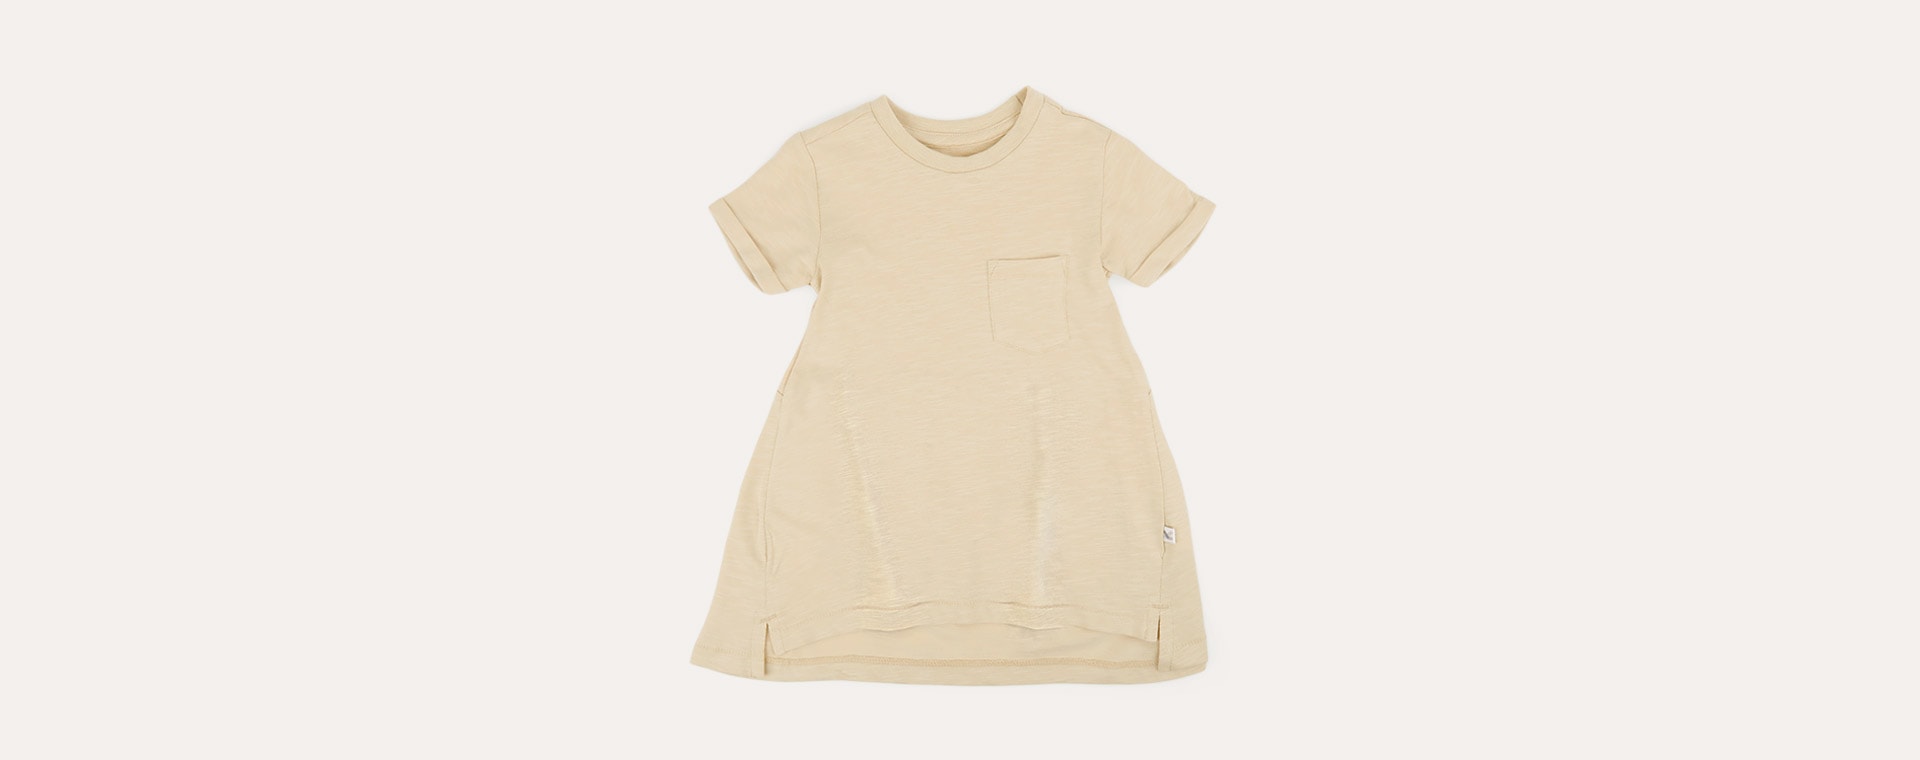 Buttermilk KIDLY Label Perfect Tee Dress